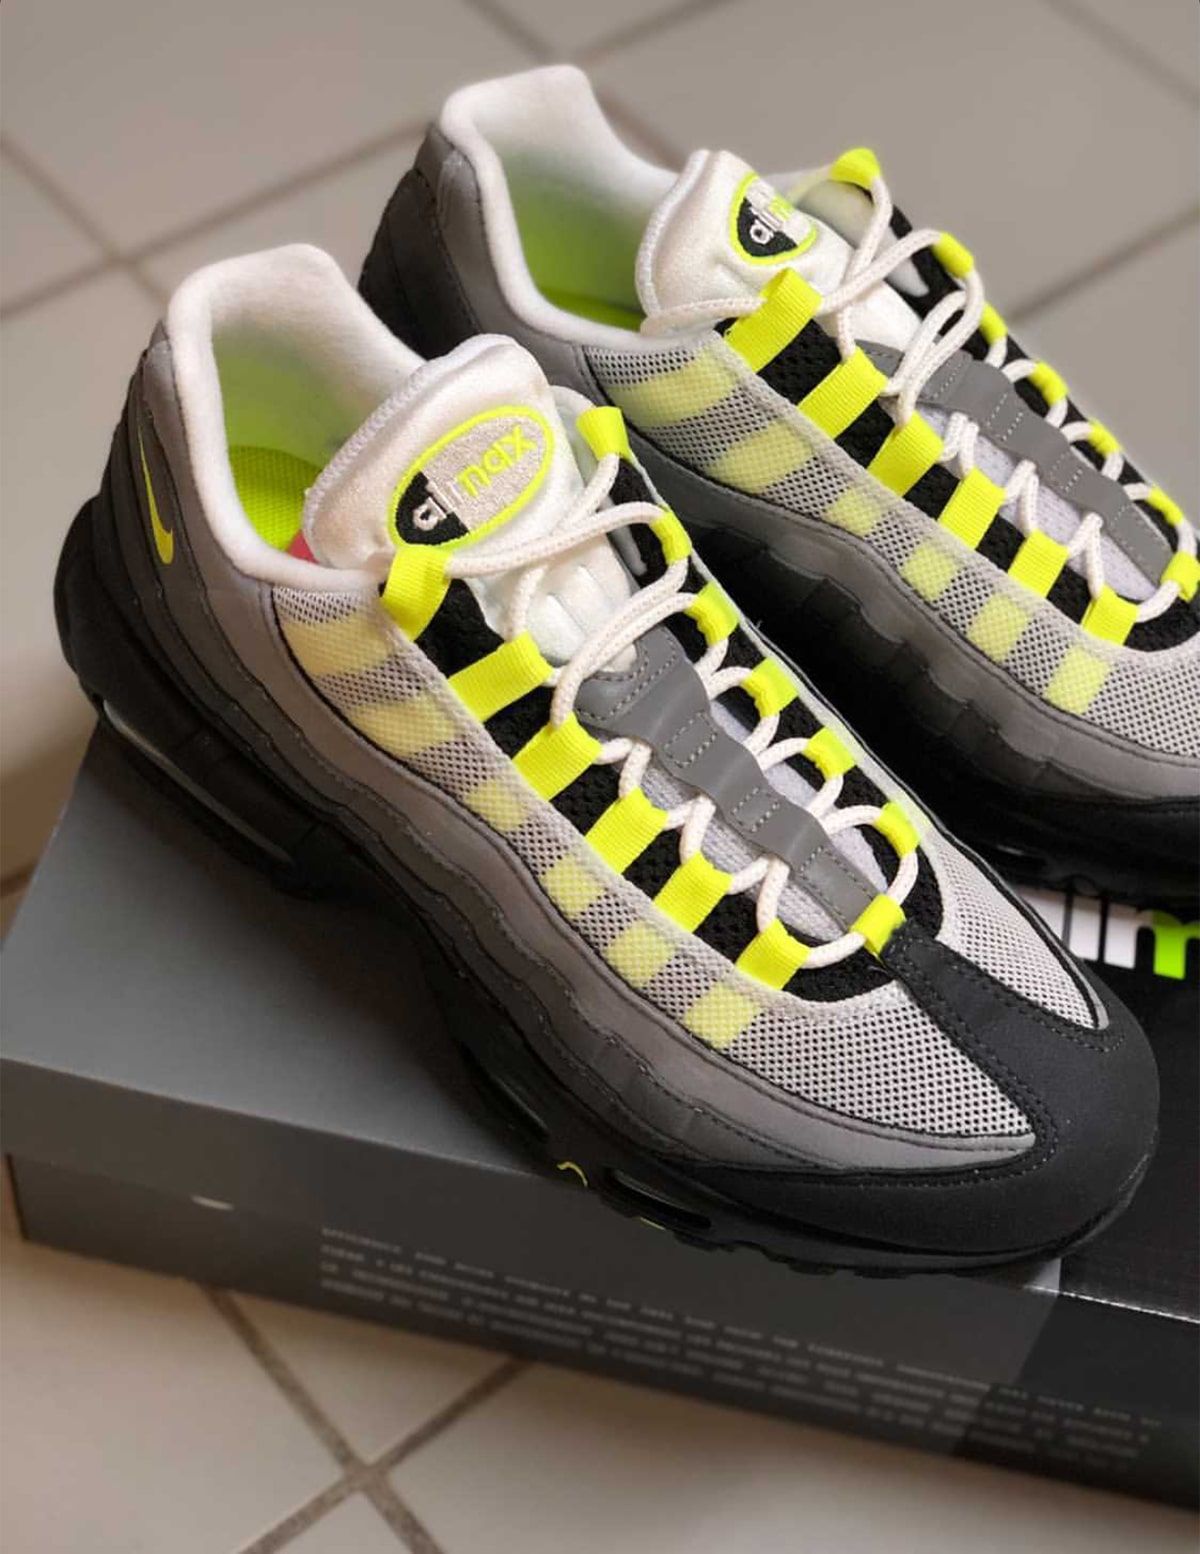 Where to Buy // Nike Air Max 95 “Neon” | House of Heat°